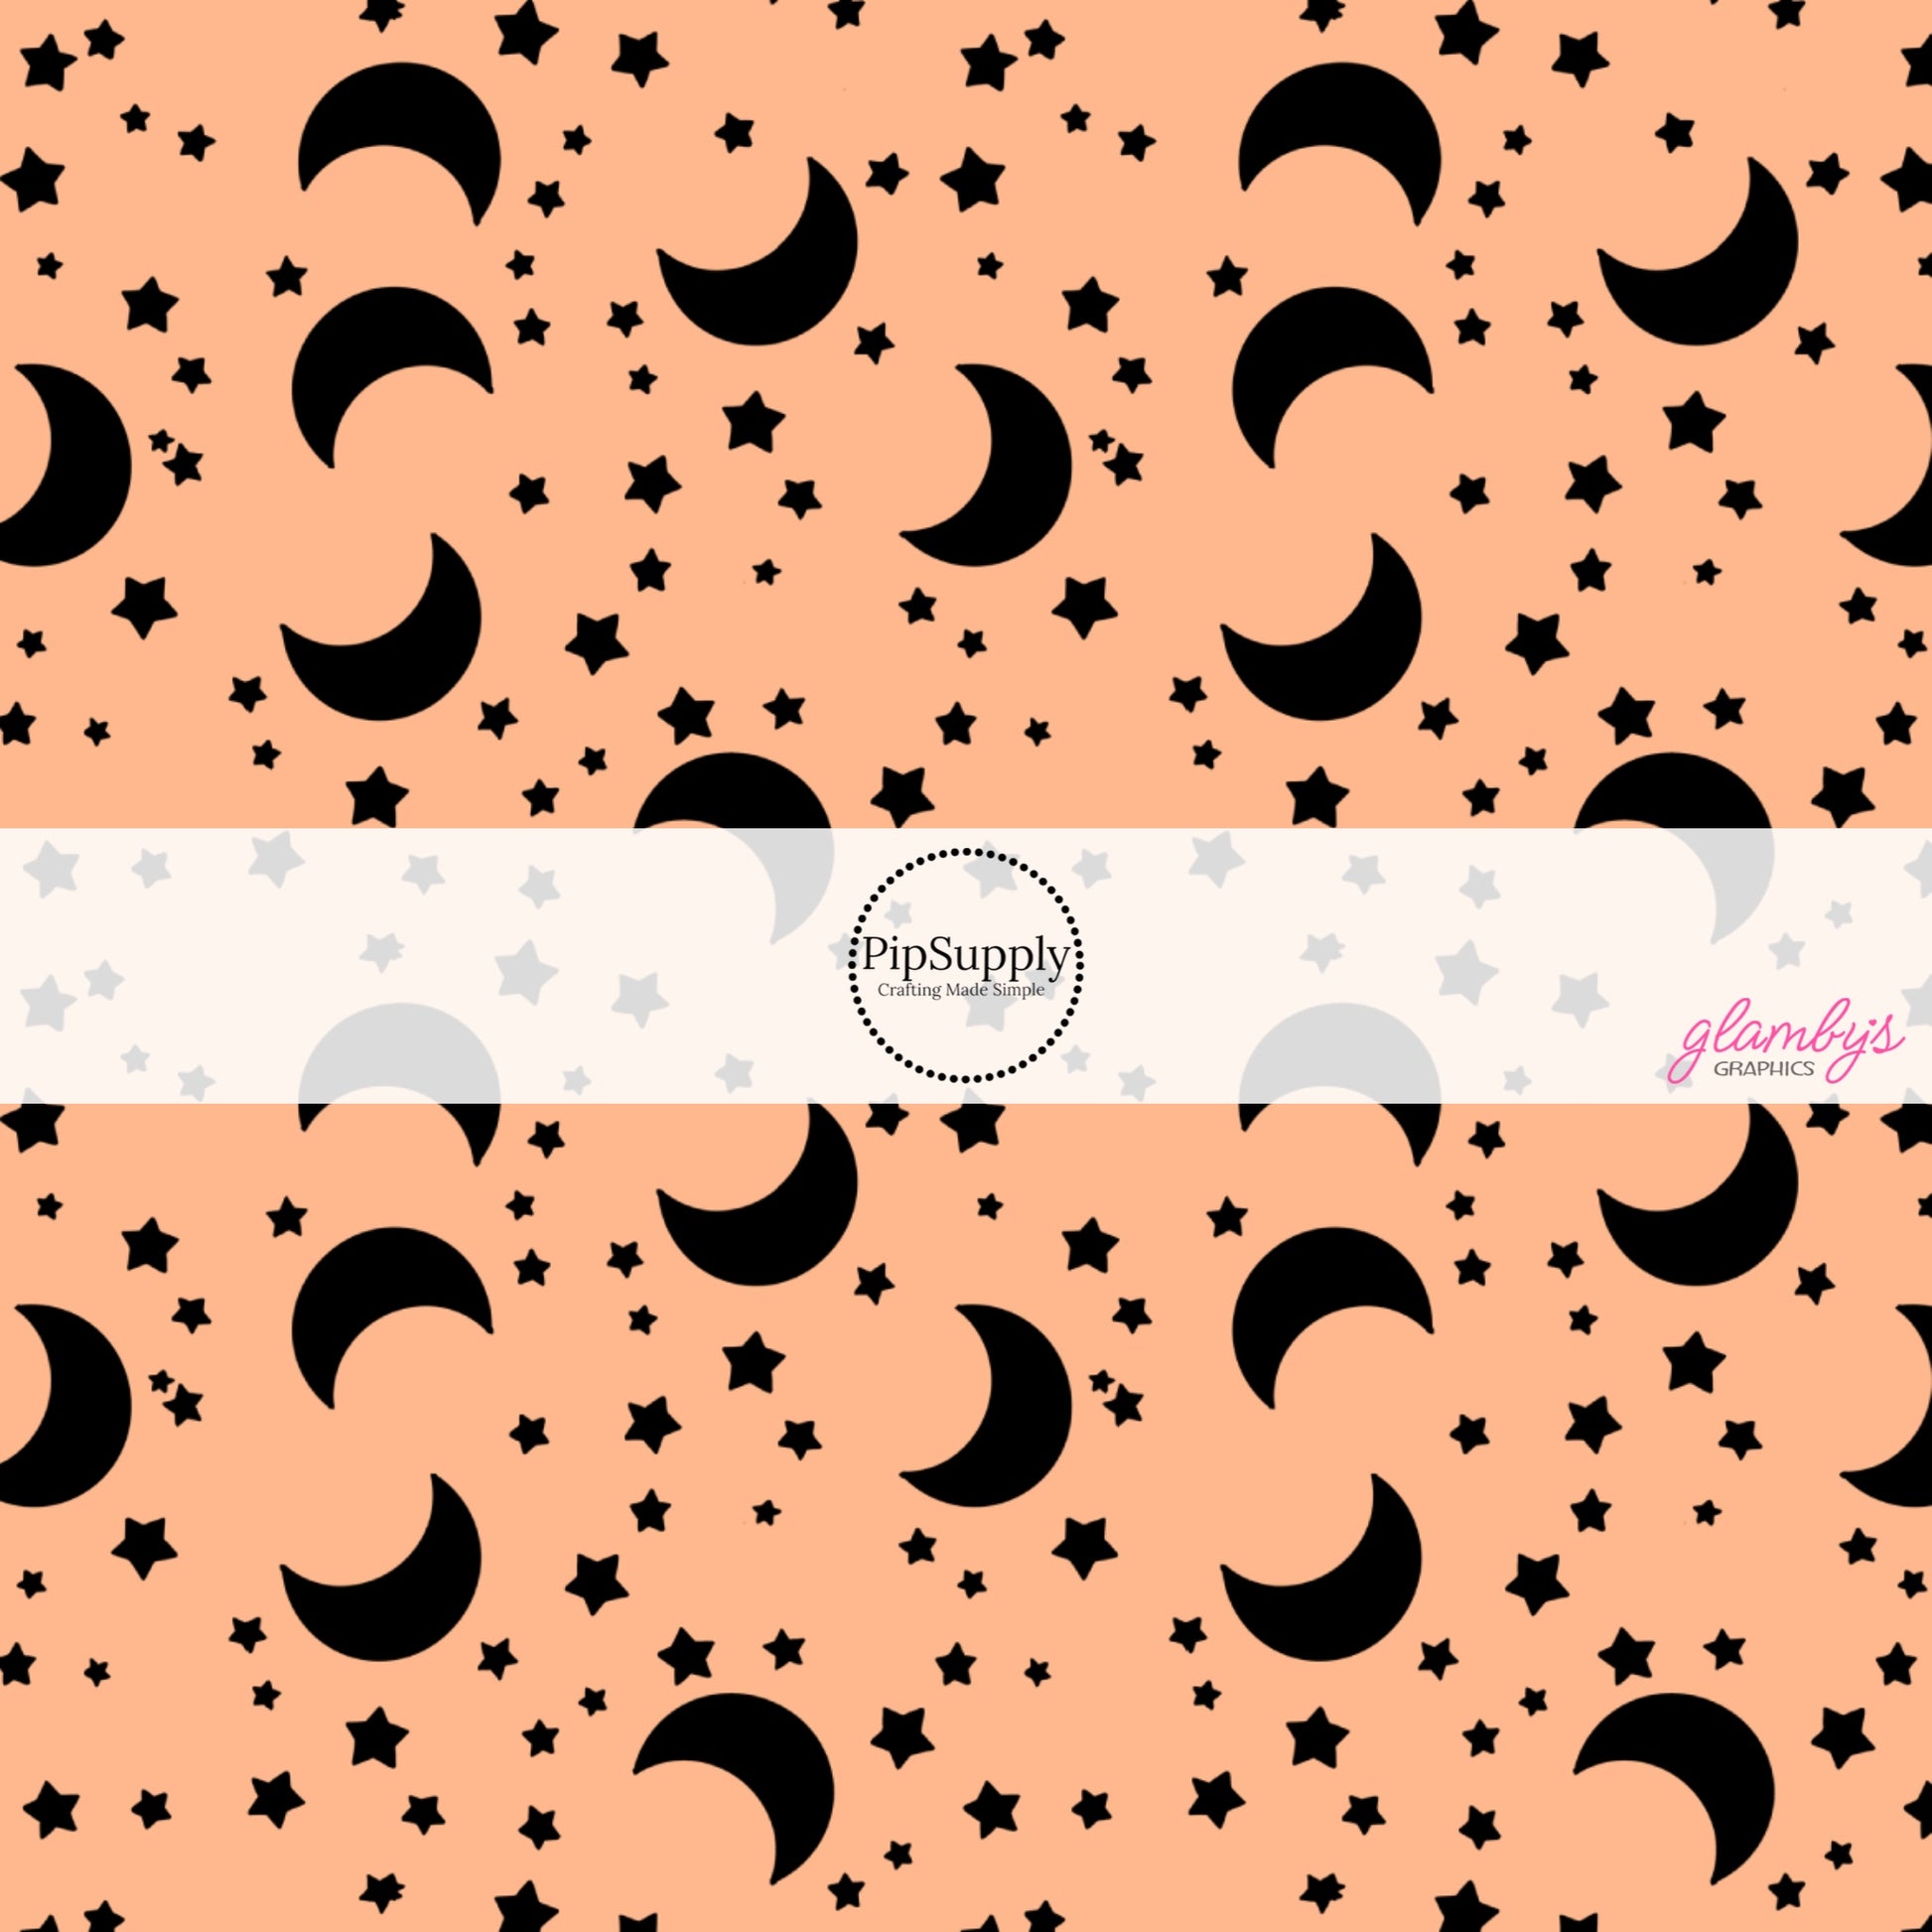 Tangerine orange fabric by the yard with black crescent moons and stars.